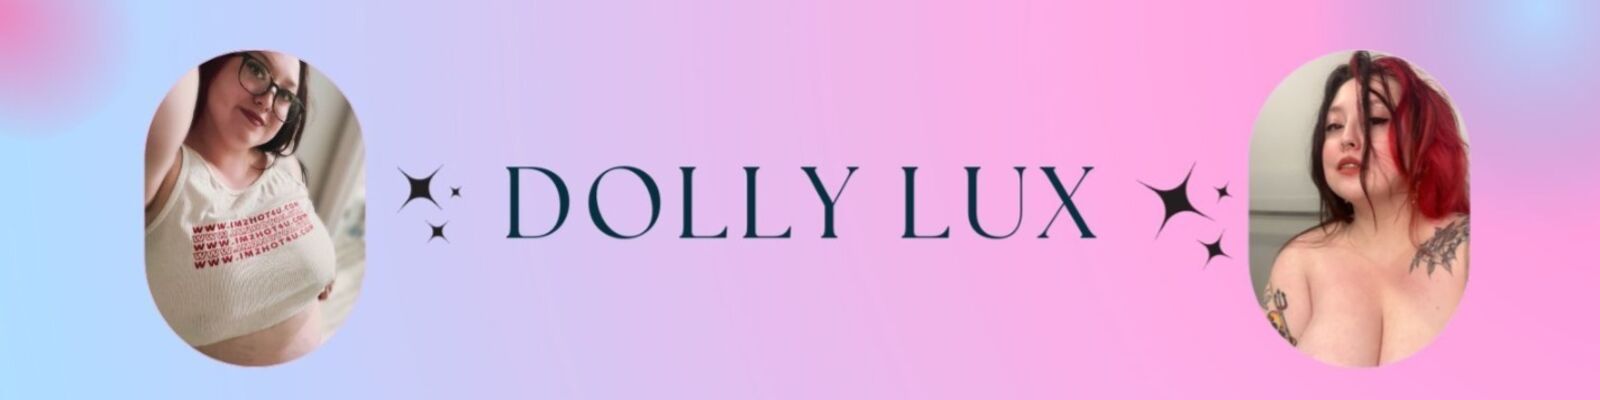 See Dolly Lux profile